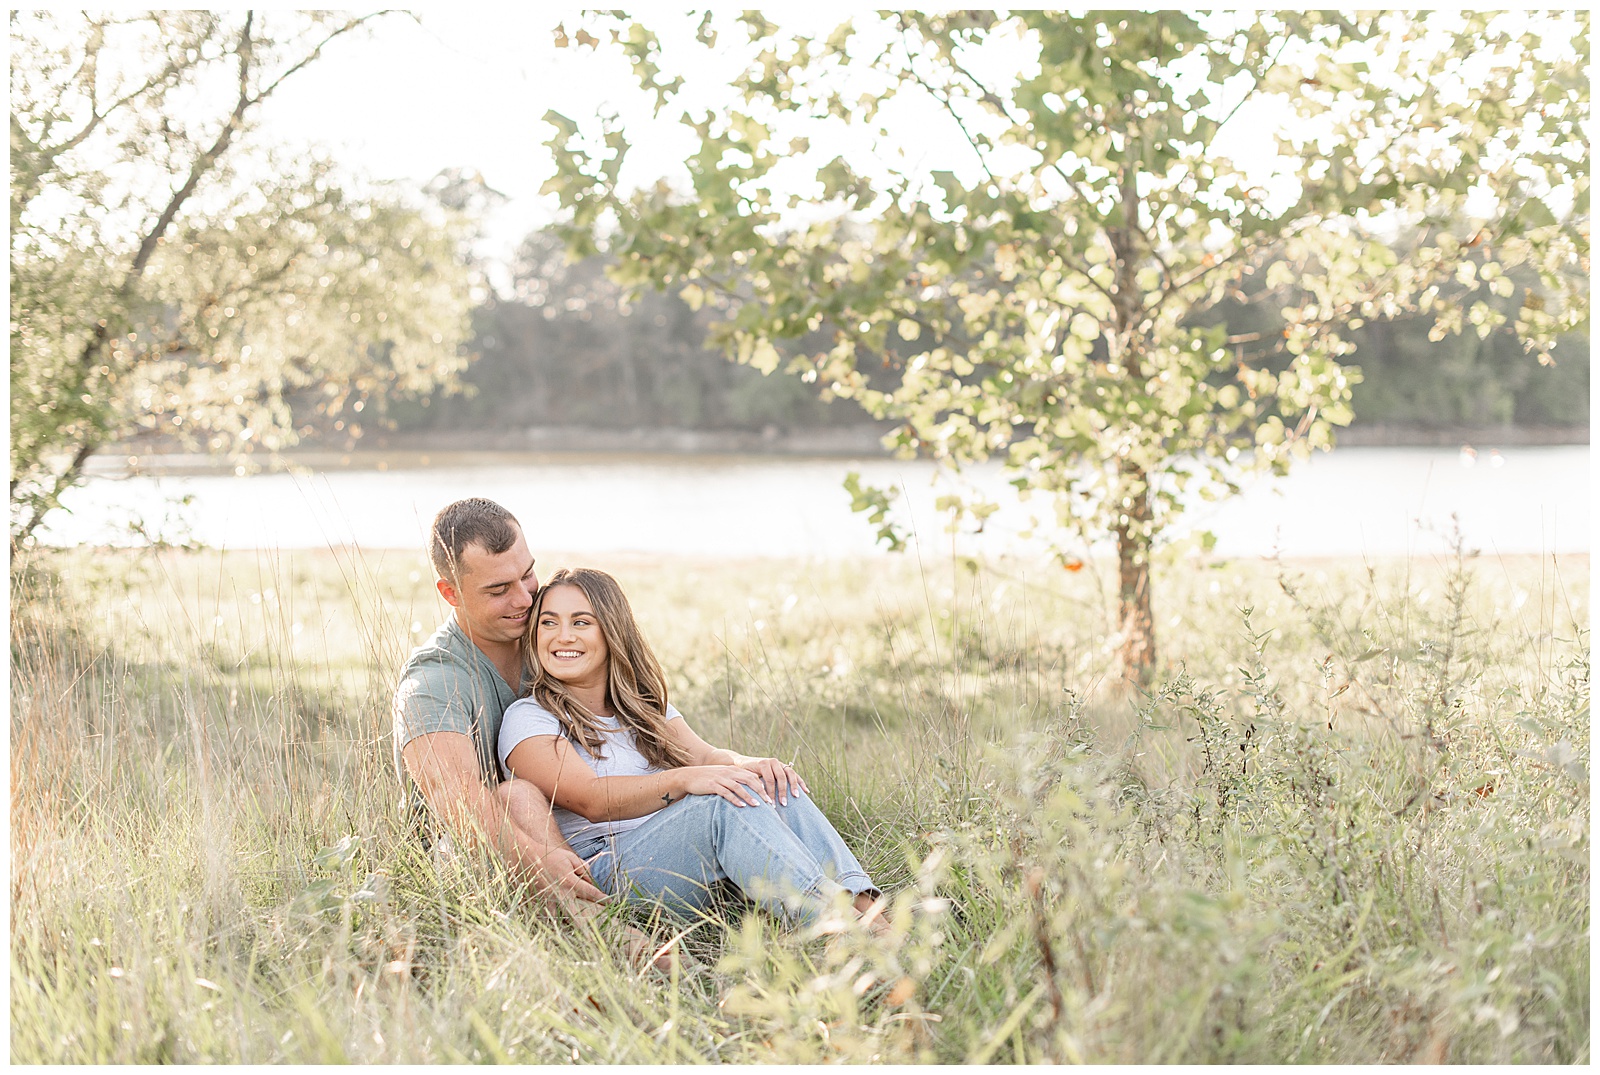 engaged couple sitting in tall wild grasses with woman leaning back against man at sunset with lake redman behind them